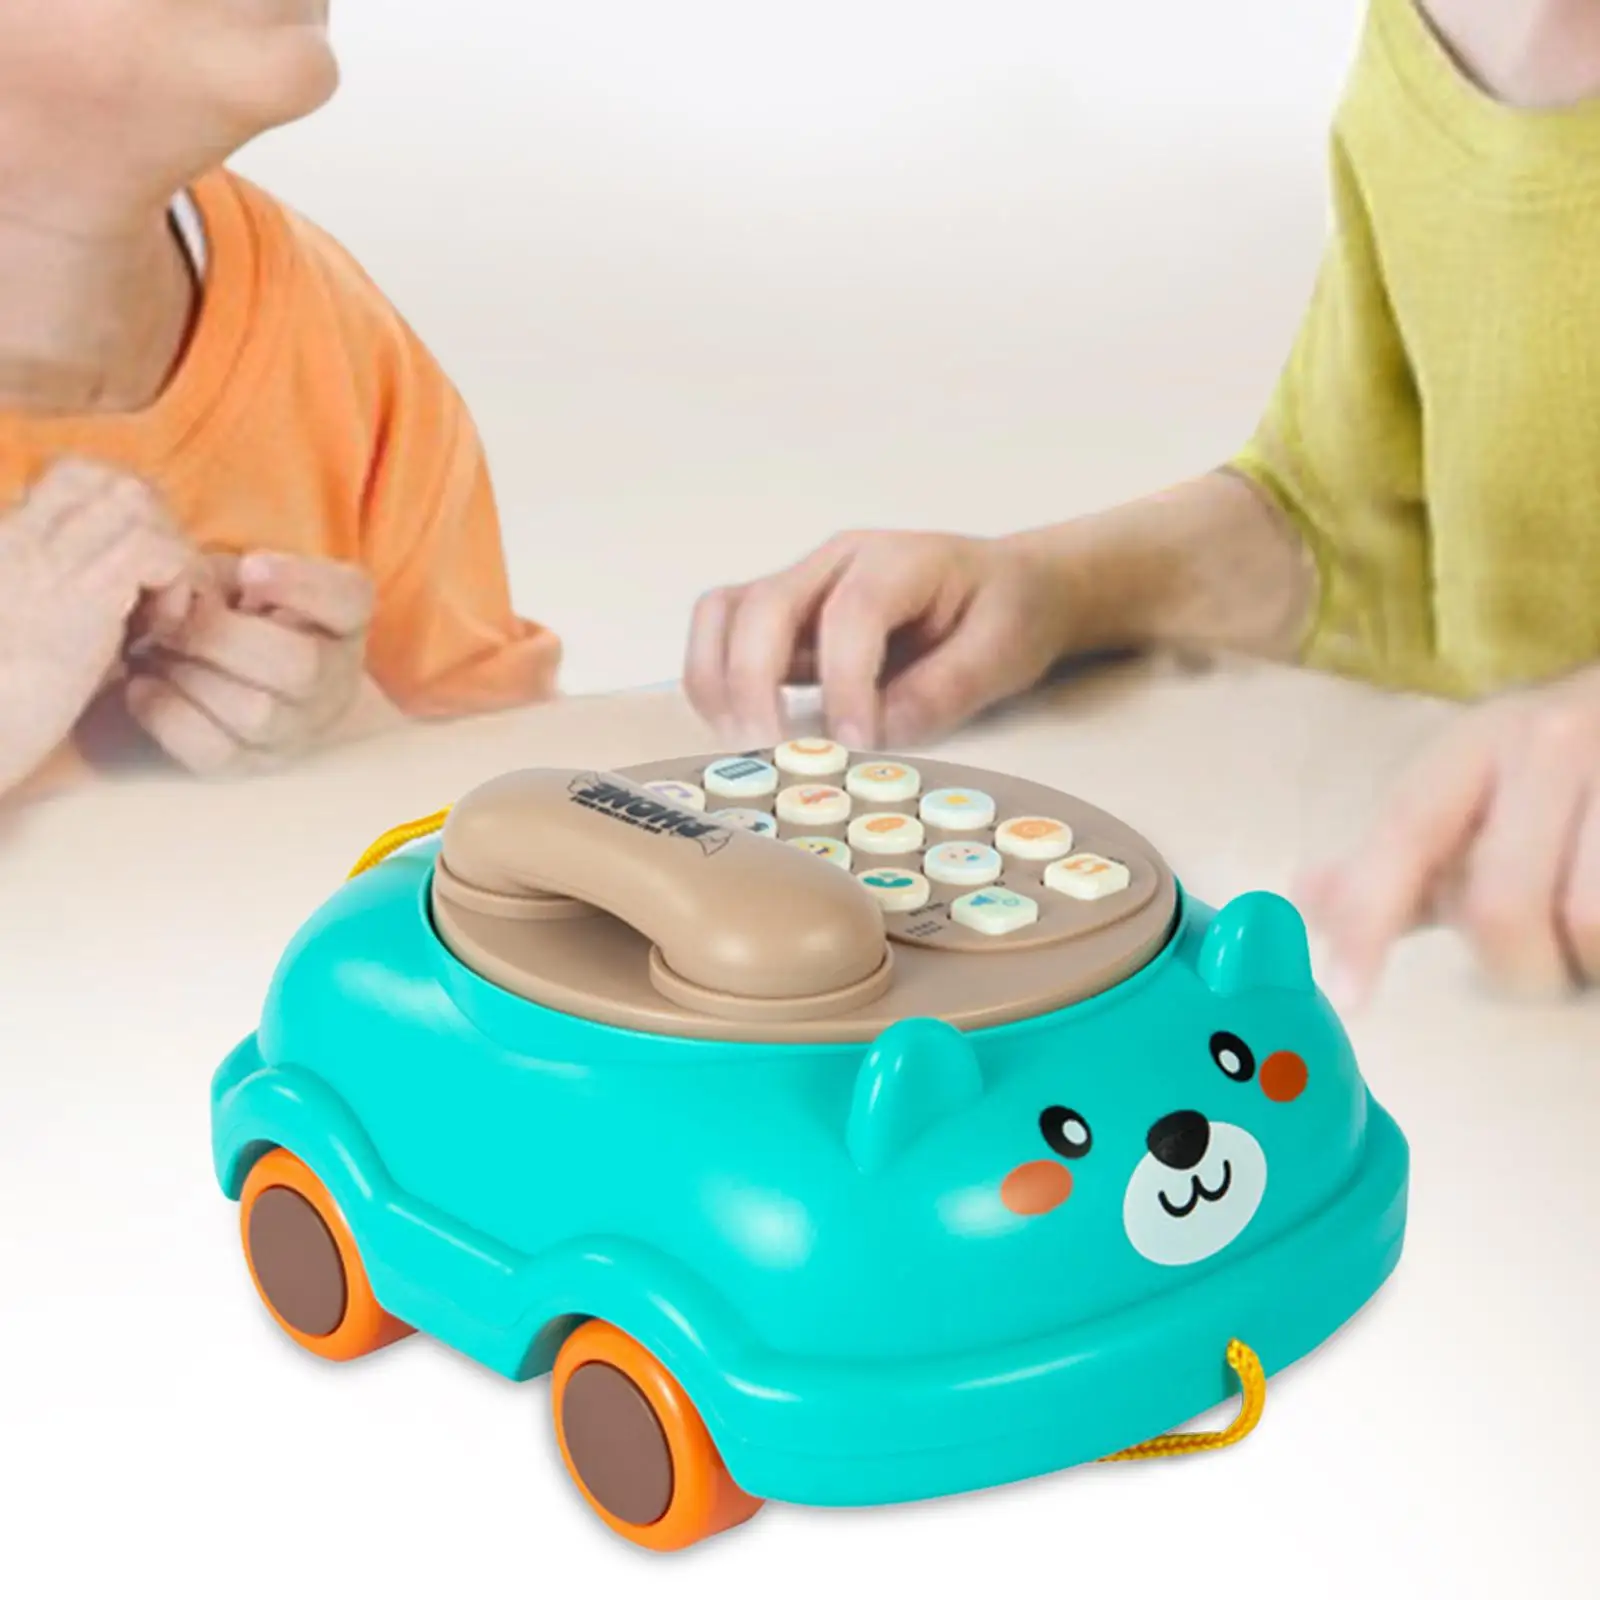 Baby Musical Toy Lights Cognitive Development Games for Boy Creative Gift 3 Years Old Preschool Educational Learning Children